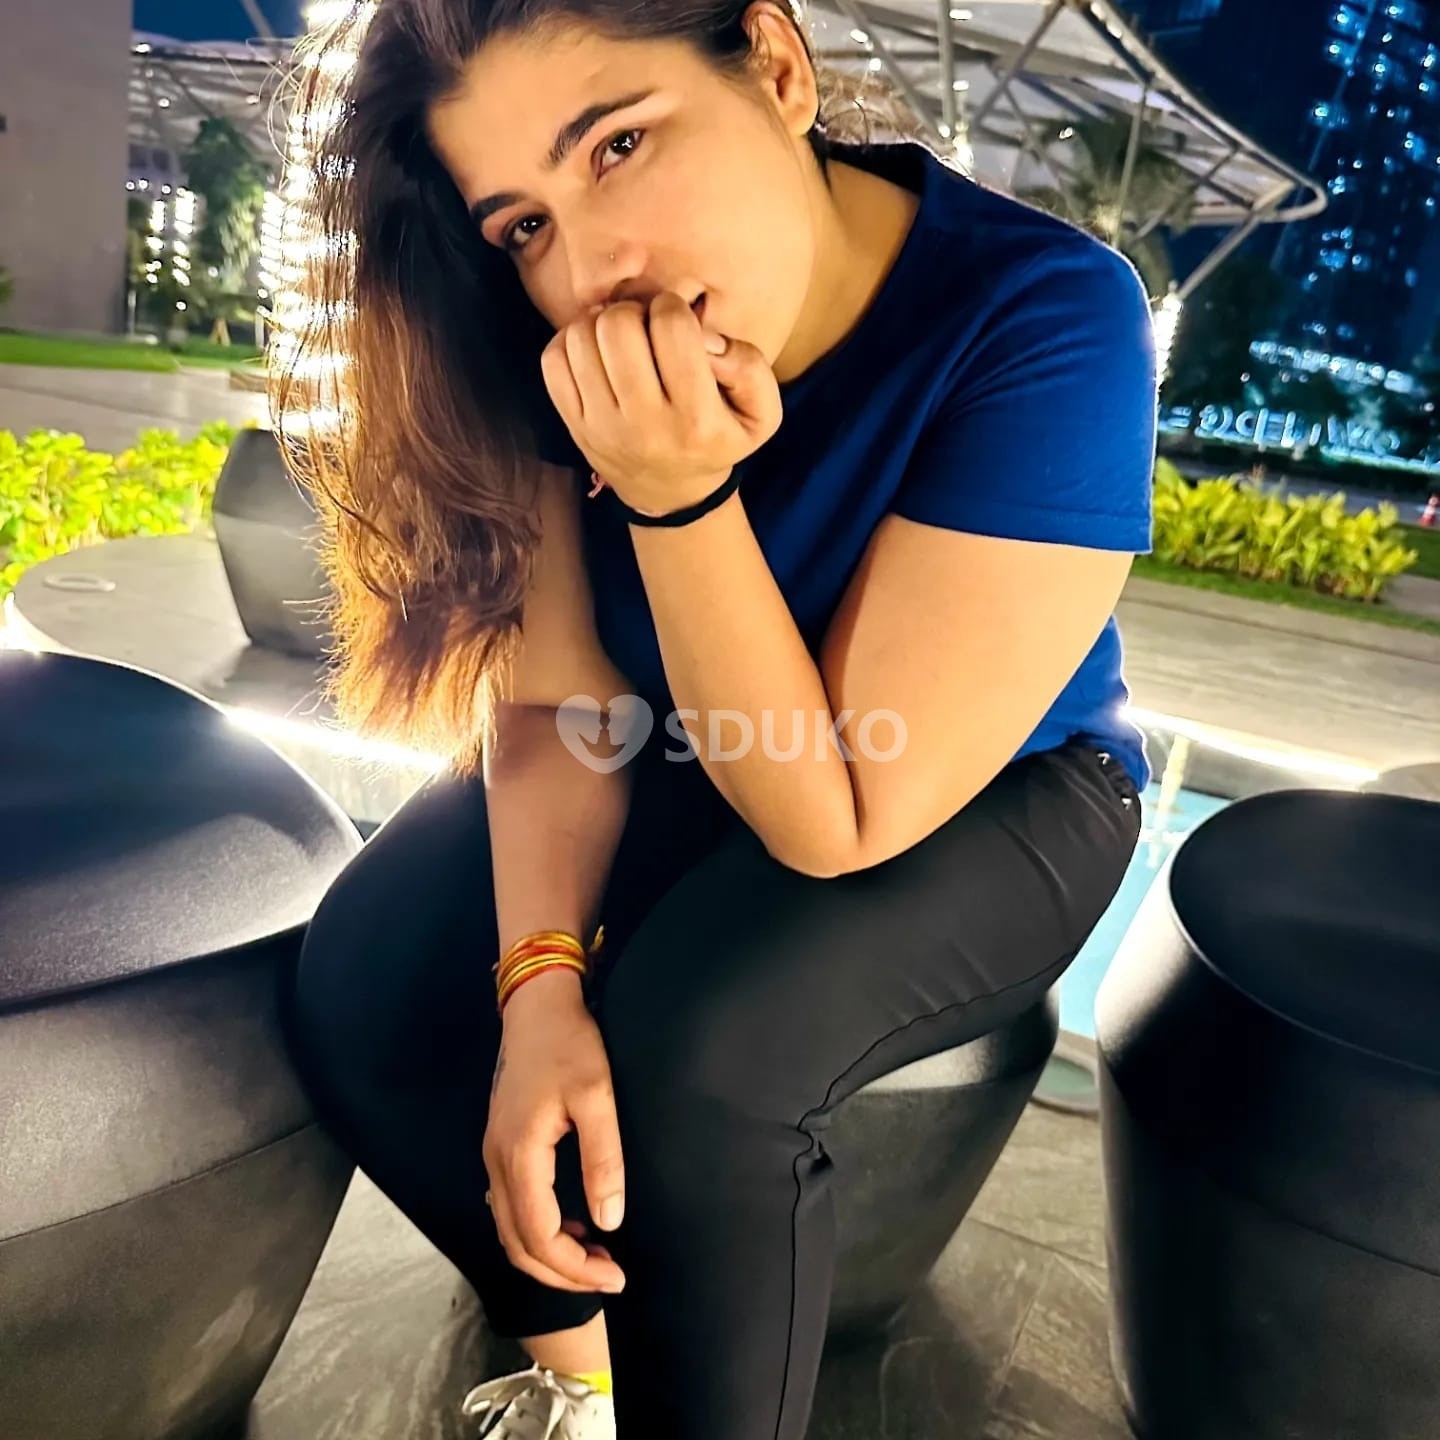 Tirupati ⭐unlimited sort 100% interested VIP call girls full satisfied all type service genuine call girl service💯